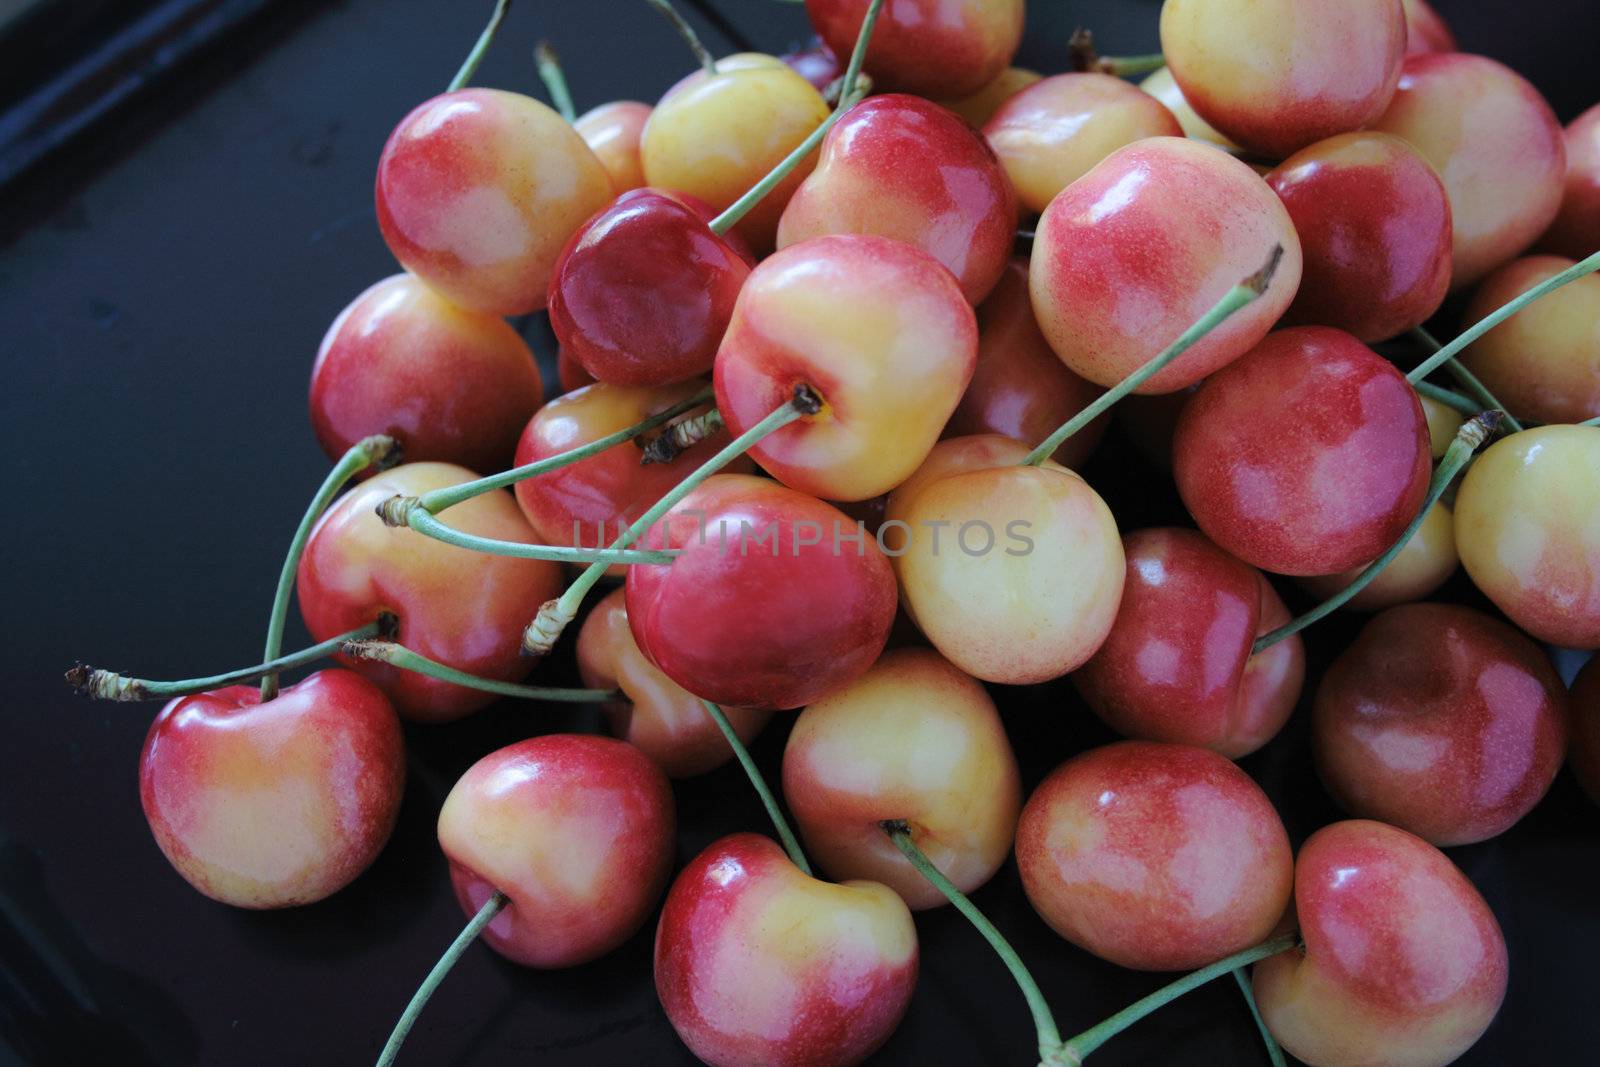 lots of fresh Rainier cherries in bright reds and yellows on a black matte tray